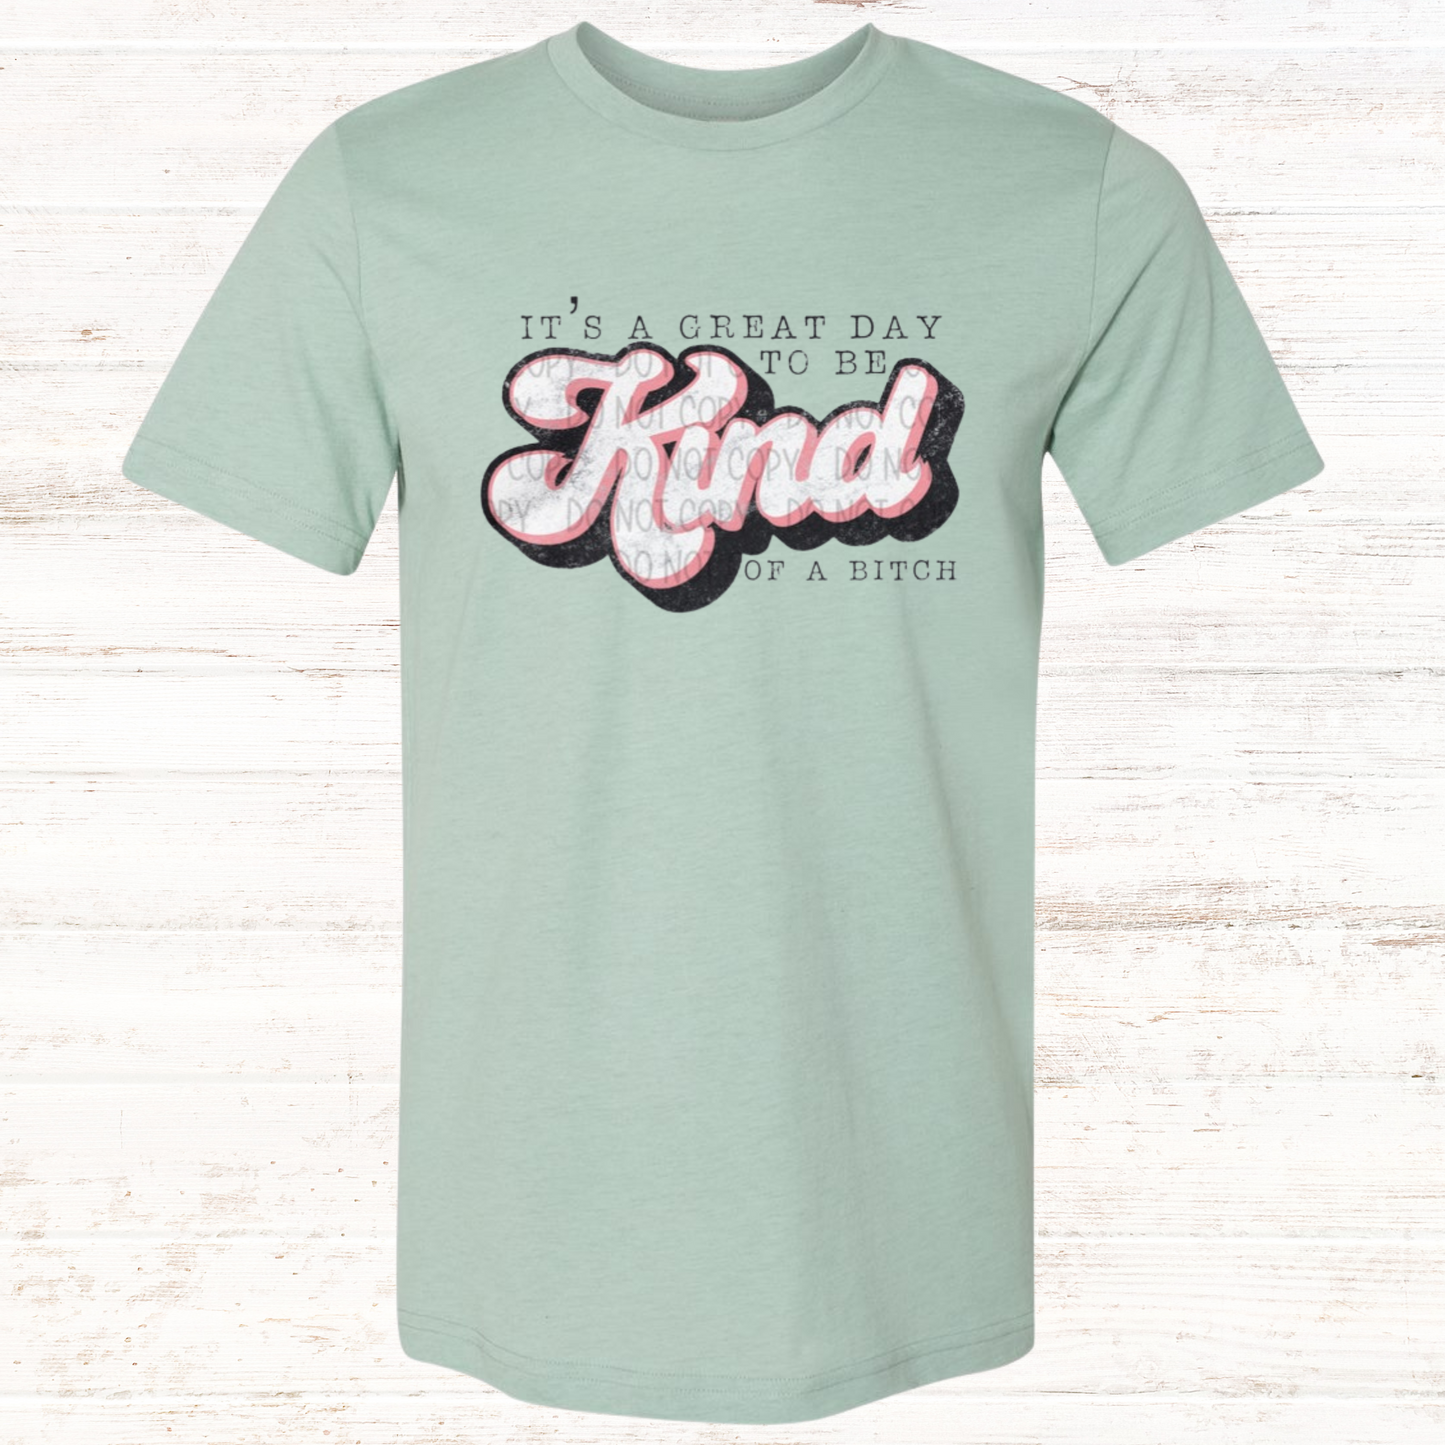 It’s a Great Day to be Kind… Shirt